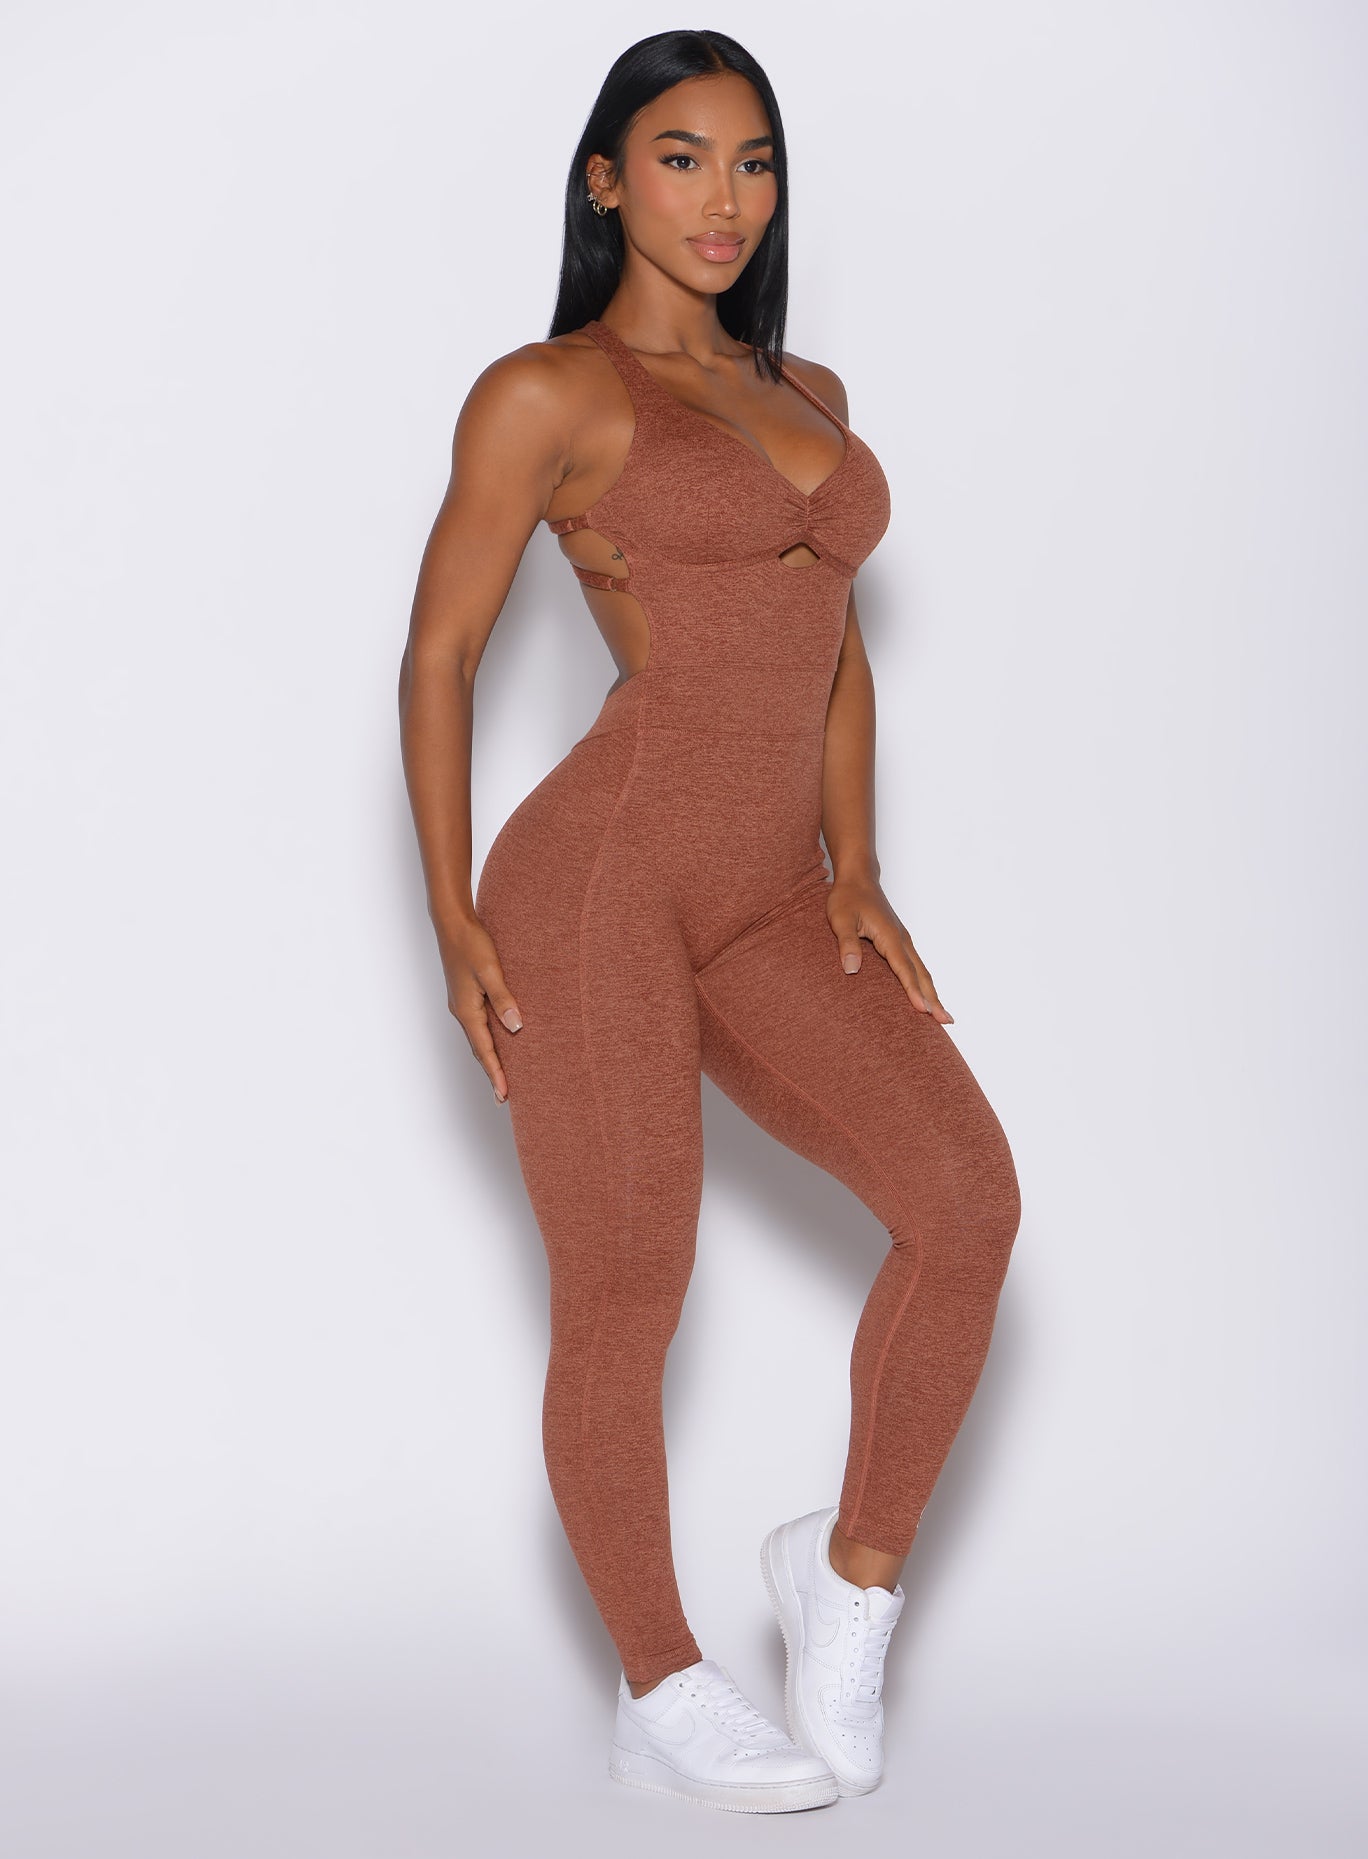 Right side profile view of a model in our bombshell bodysuit in spiced chai color